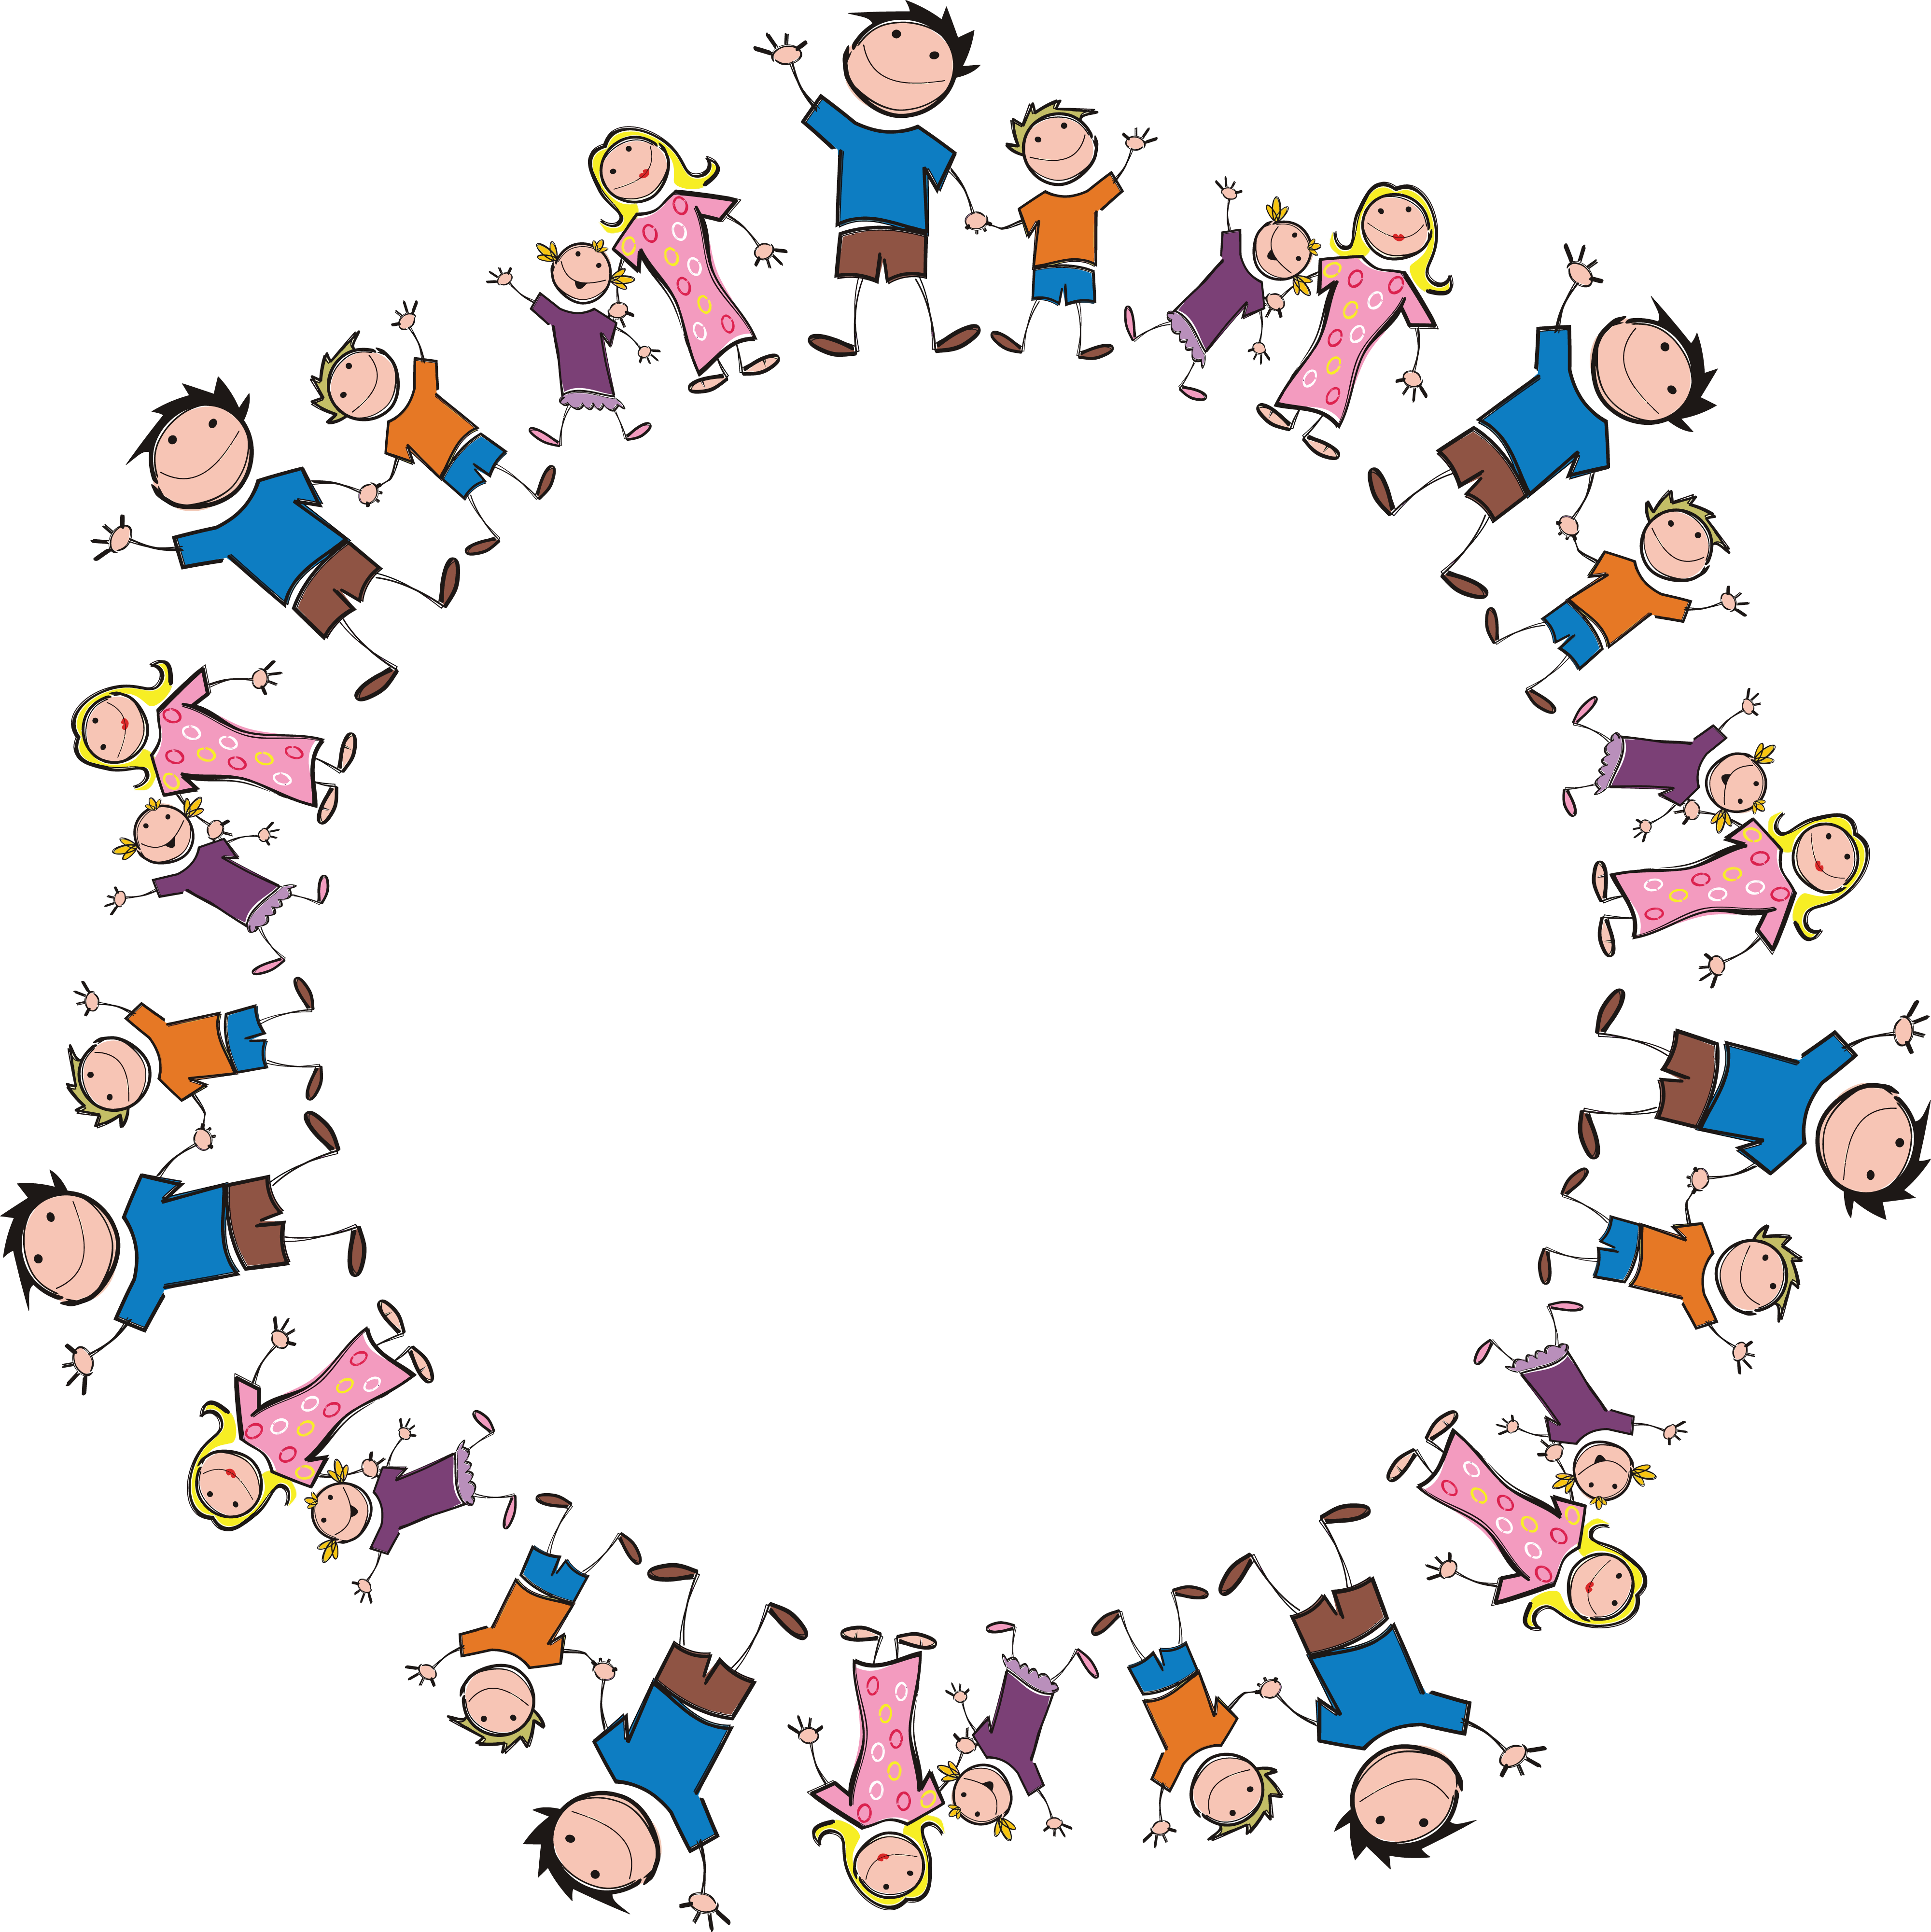 Free Clipart Of A Round Frame Made Of Stick Family - My Favorite Sticker Book For Girls 4-8: My Favorite (4000x4002)